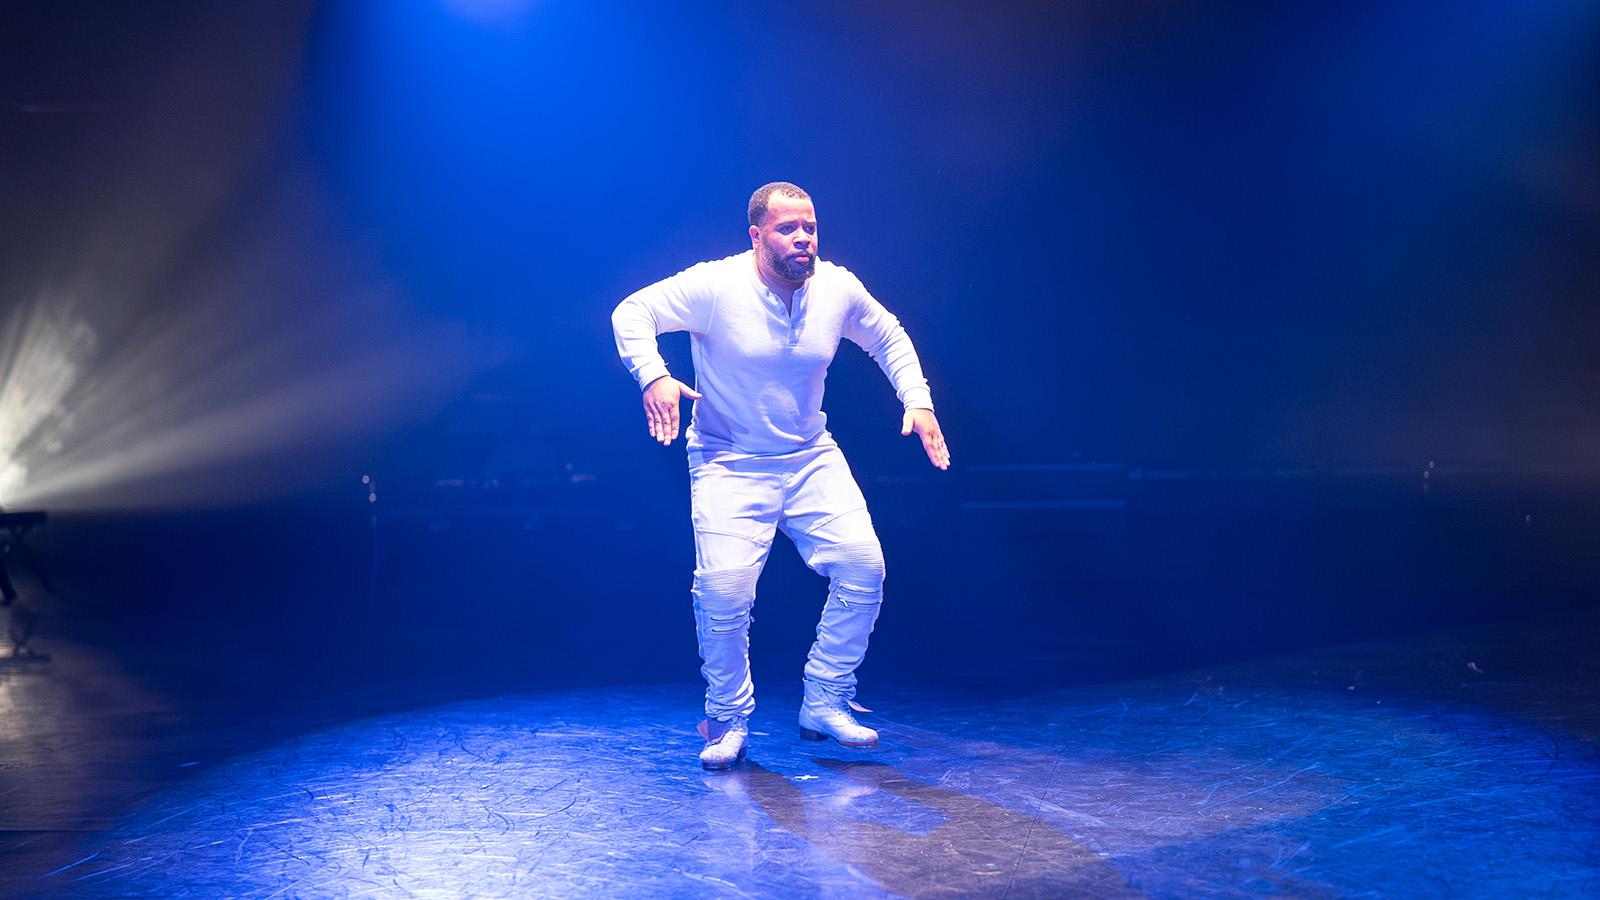 person dressed in white on lit stage